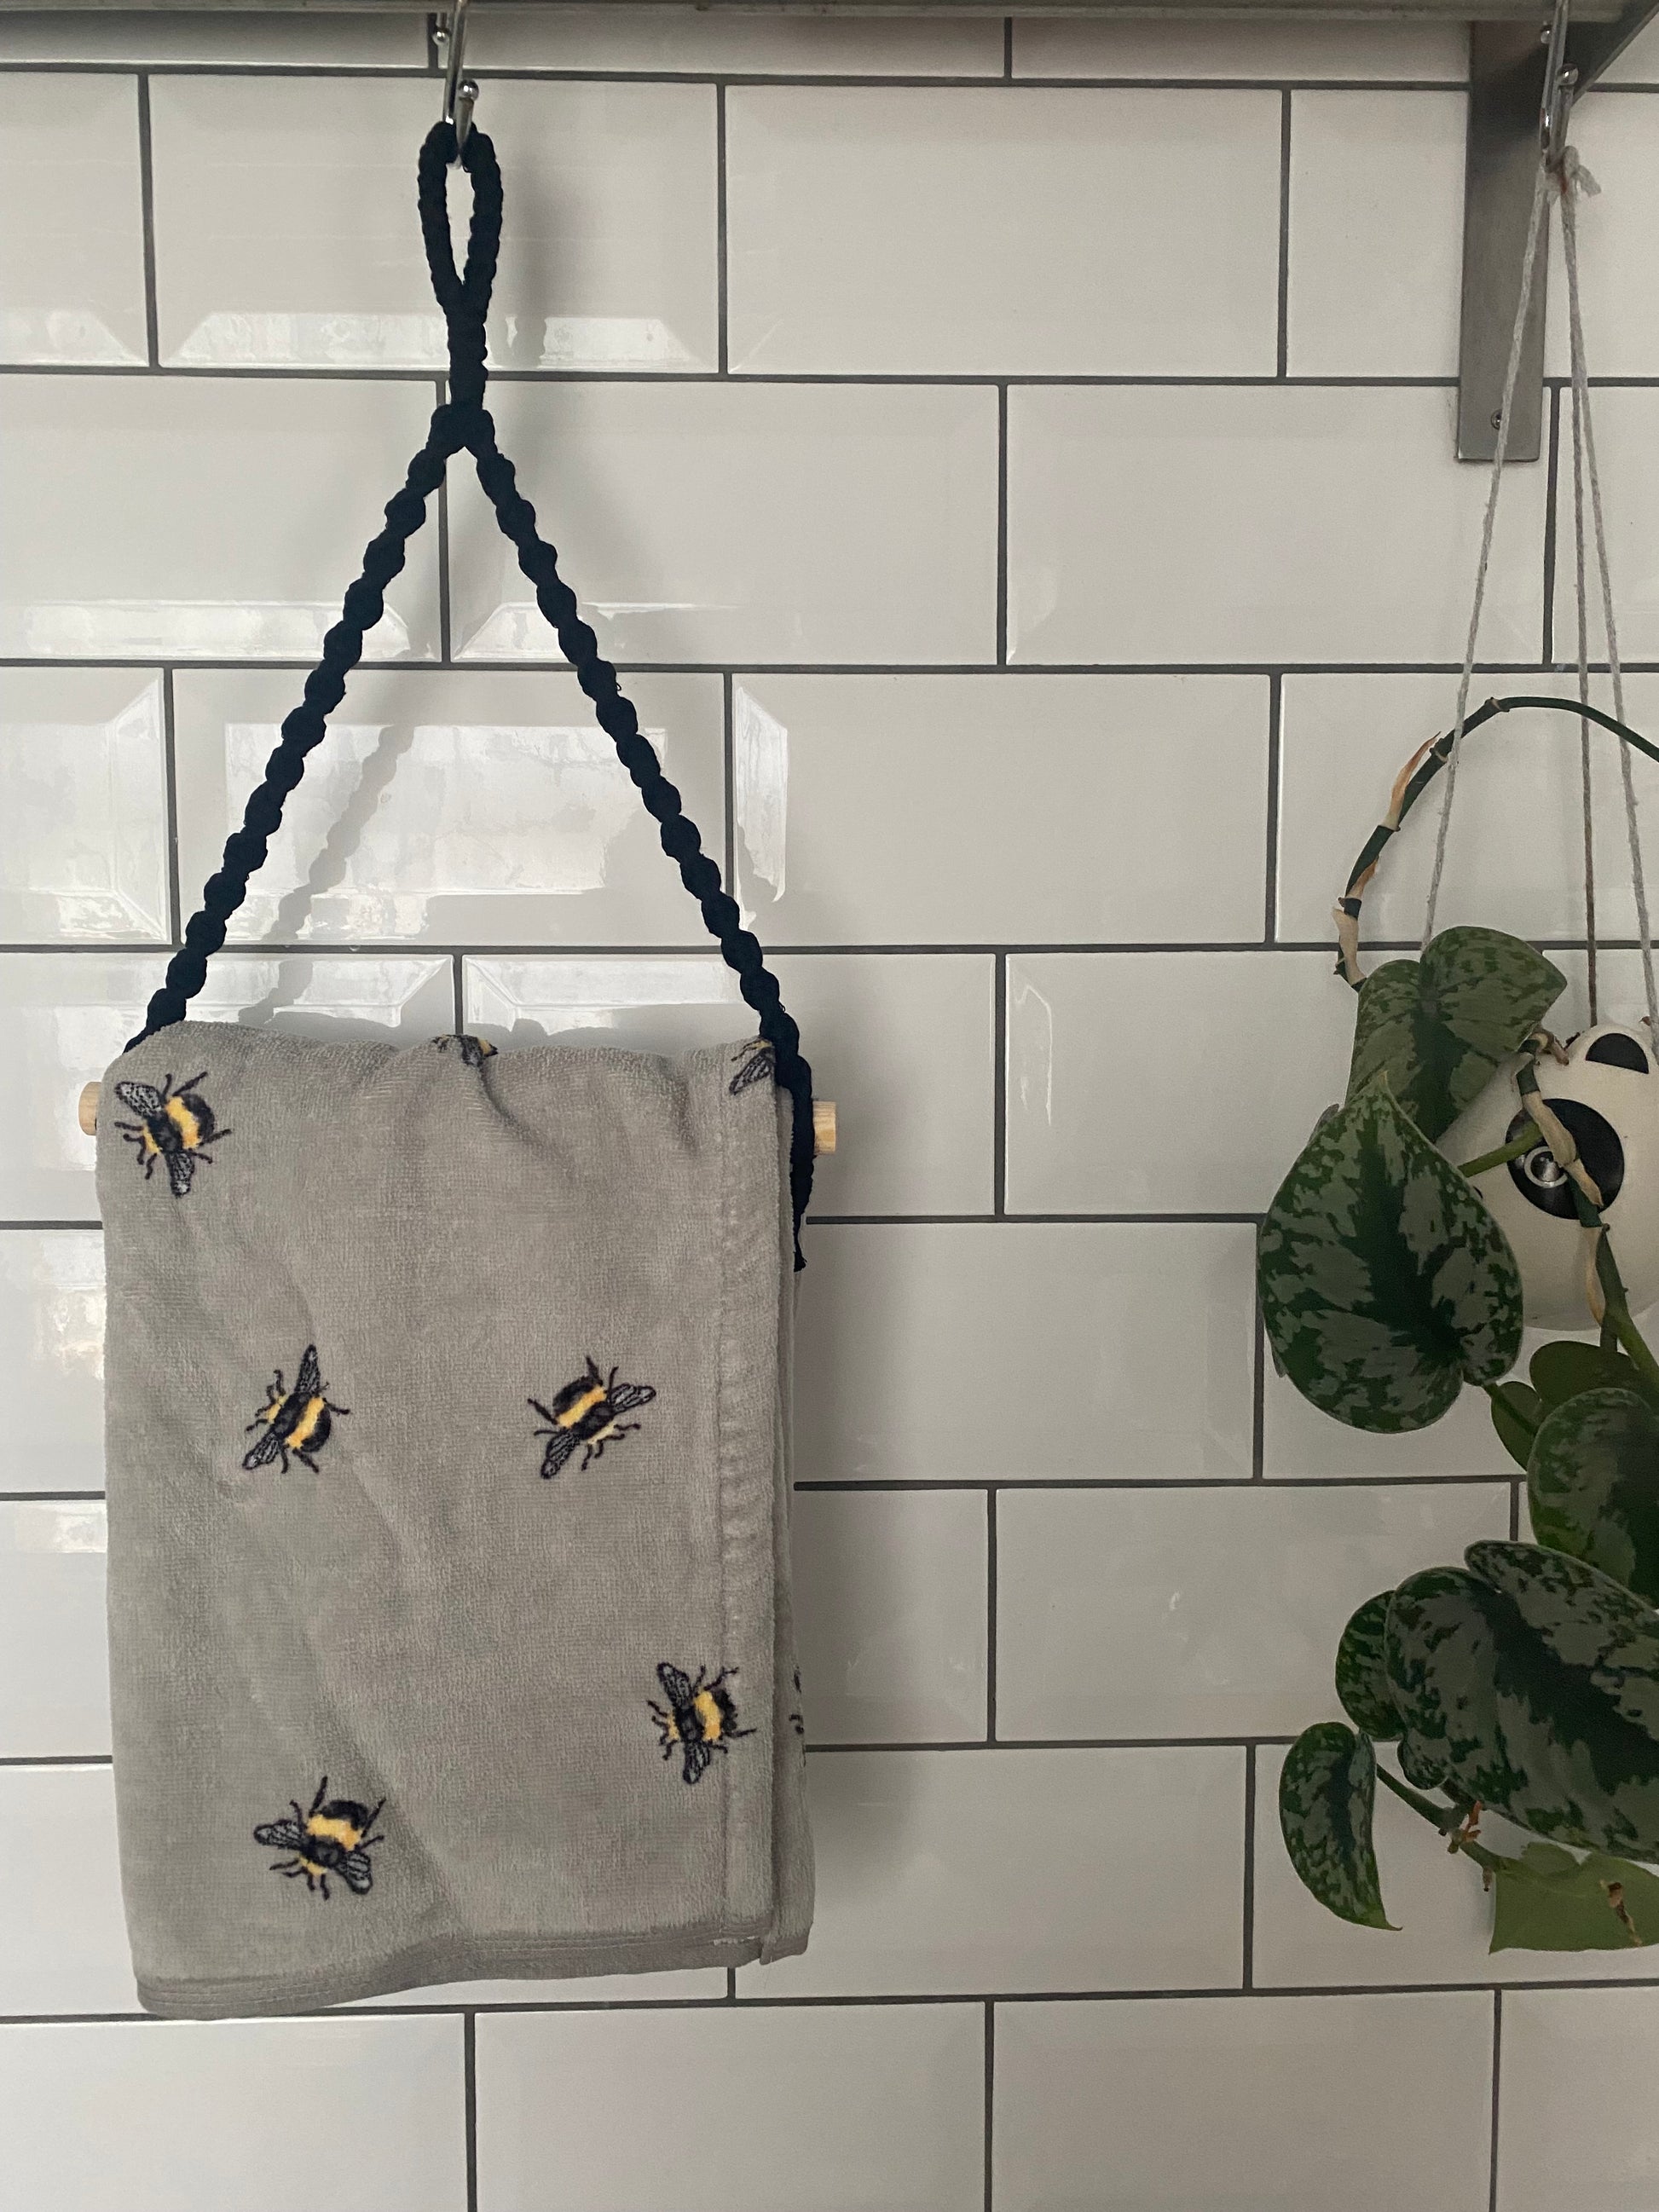 A gray towel made from sustainable recycled cotton, adorned with embroidered bees, hangs on a Macra-Made-With-Love Hand towel holder against a white subway-tile wall. Next to it, an eco-friendly green potted plant with heart-shaped leaves is partially visible, suspended in a macramé plant hanger.